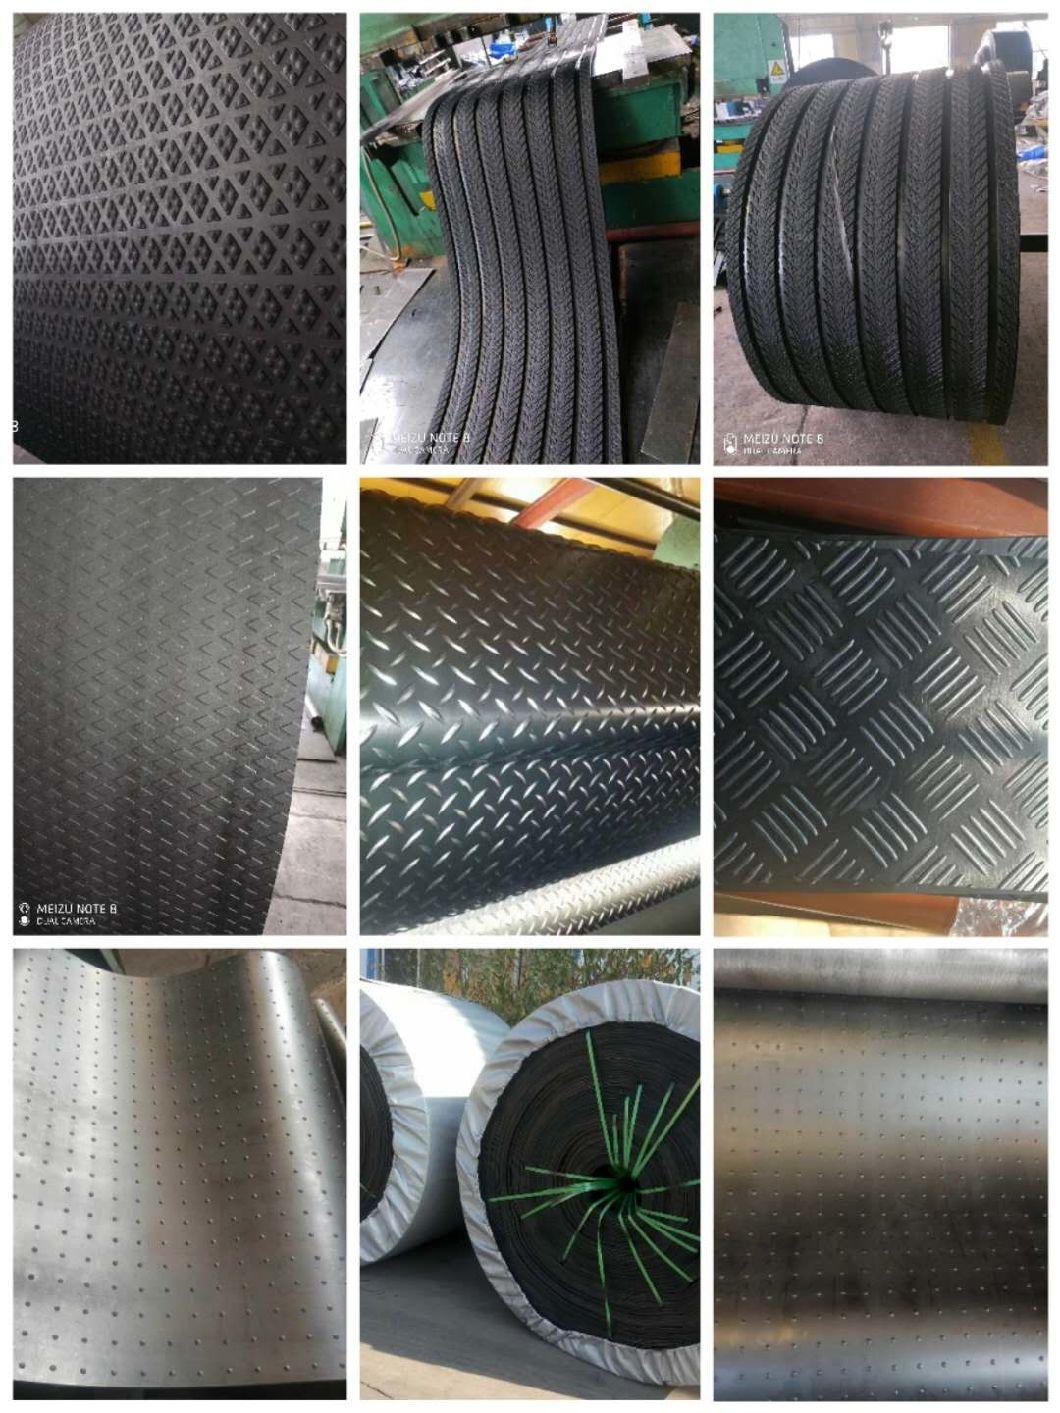 Bare Surface Rubber Conveyor Belt with Fabric Back